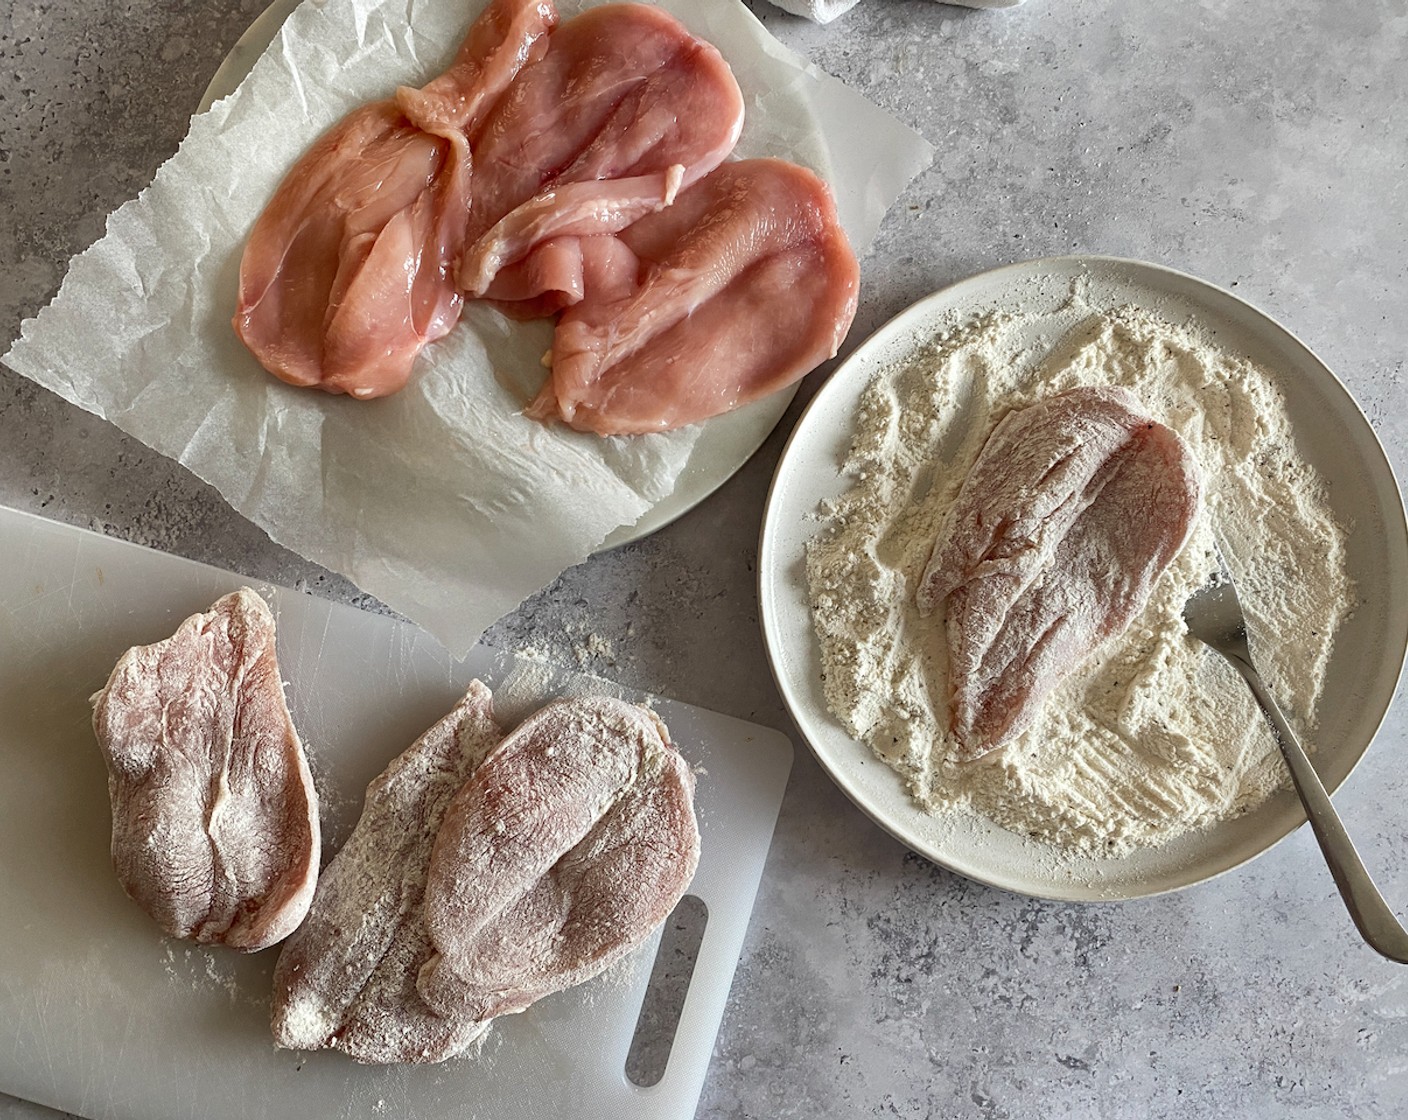 step 2 Season the All-Purpose Flour (1 cup) with Salt (1 Tbsp) and Freshly Ground Black Pepper (1/2 Tbsp), and generously coat the prepared chicken fillets well in the seasoned flour. Reserve 1 Tbsp of seasoned flour.